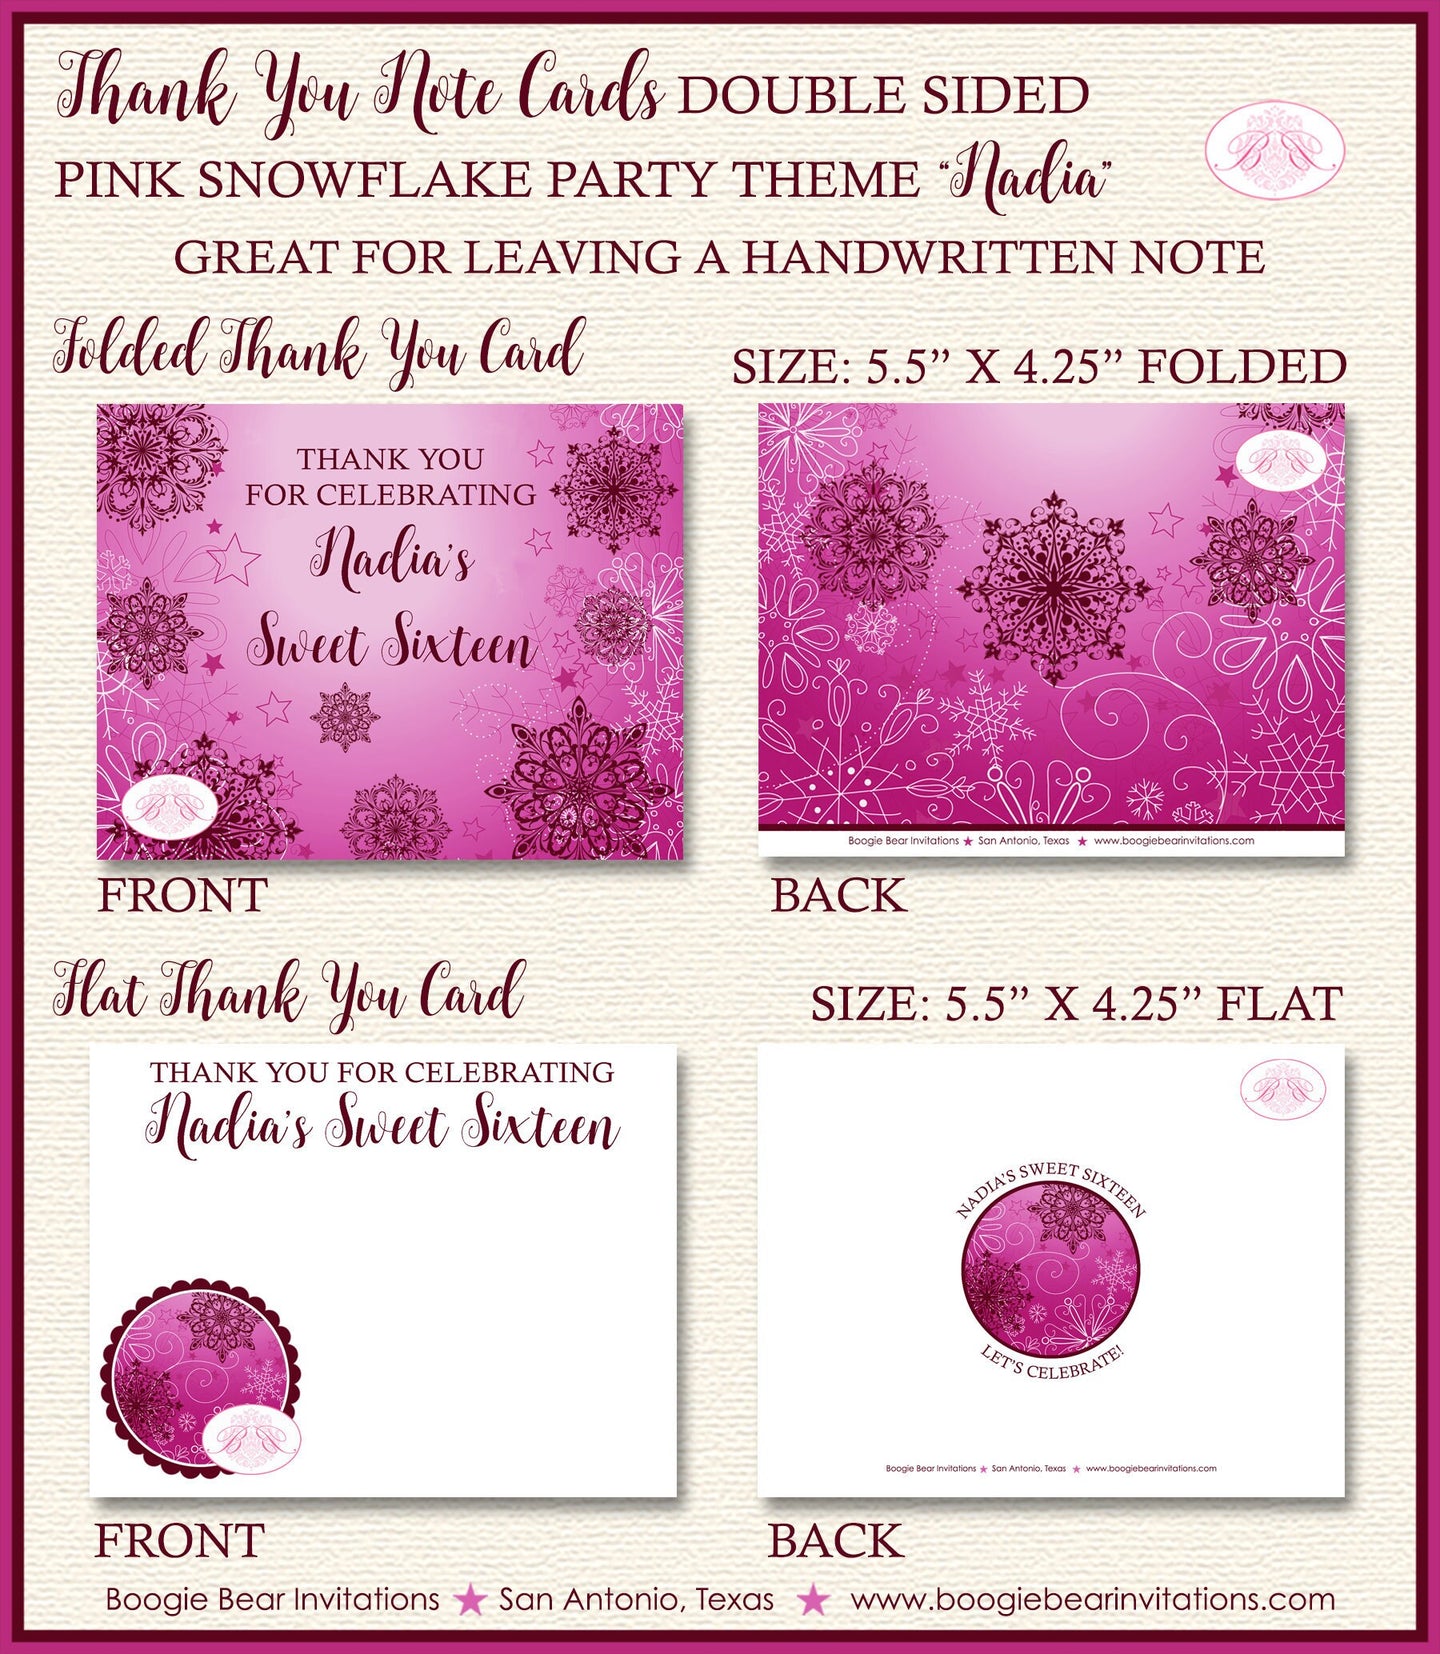 Winter Snowflake Party Thank You Cards Sweet 16 Pink Red Birthday Ombre Christmas Snow Formal Boogie Bear Invitations Nadia Theme Printed